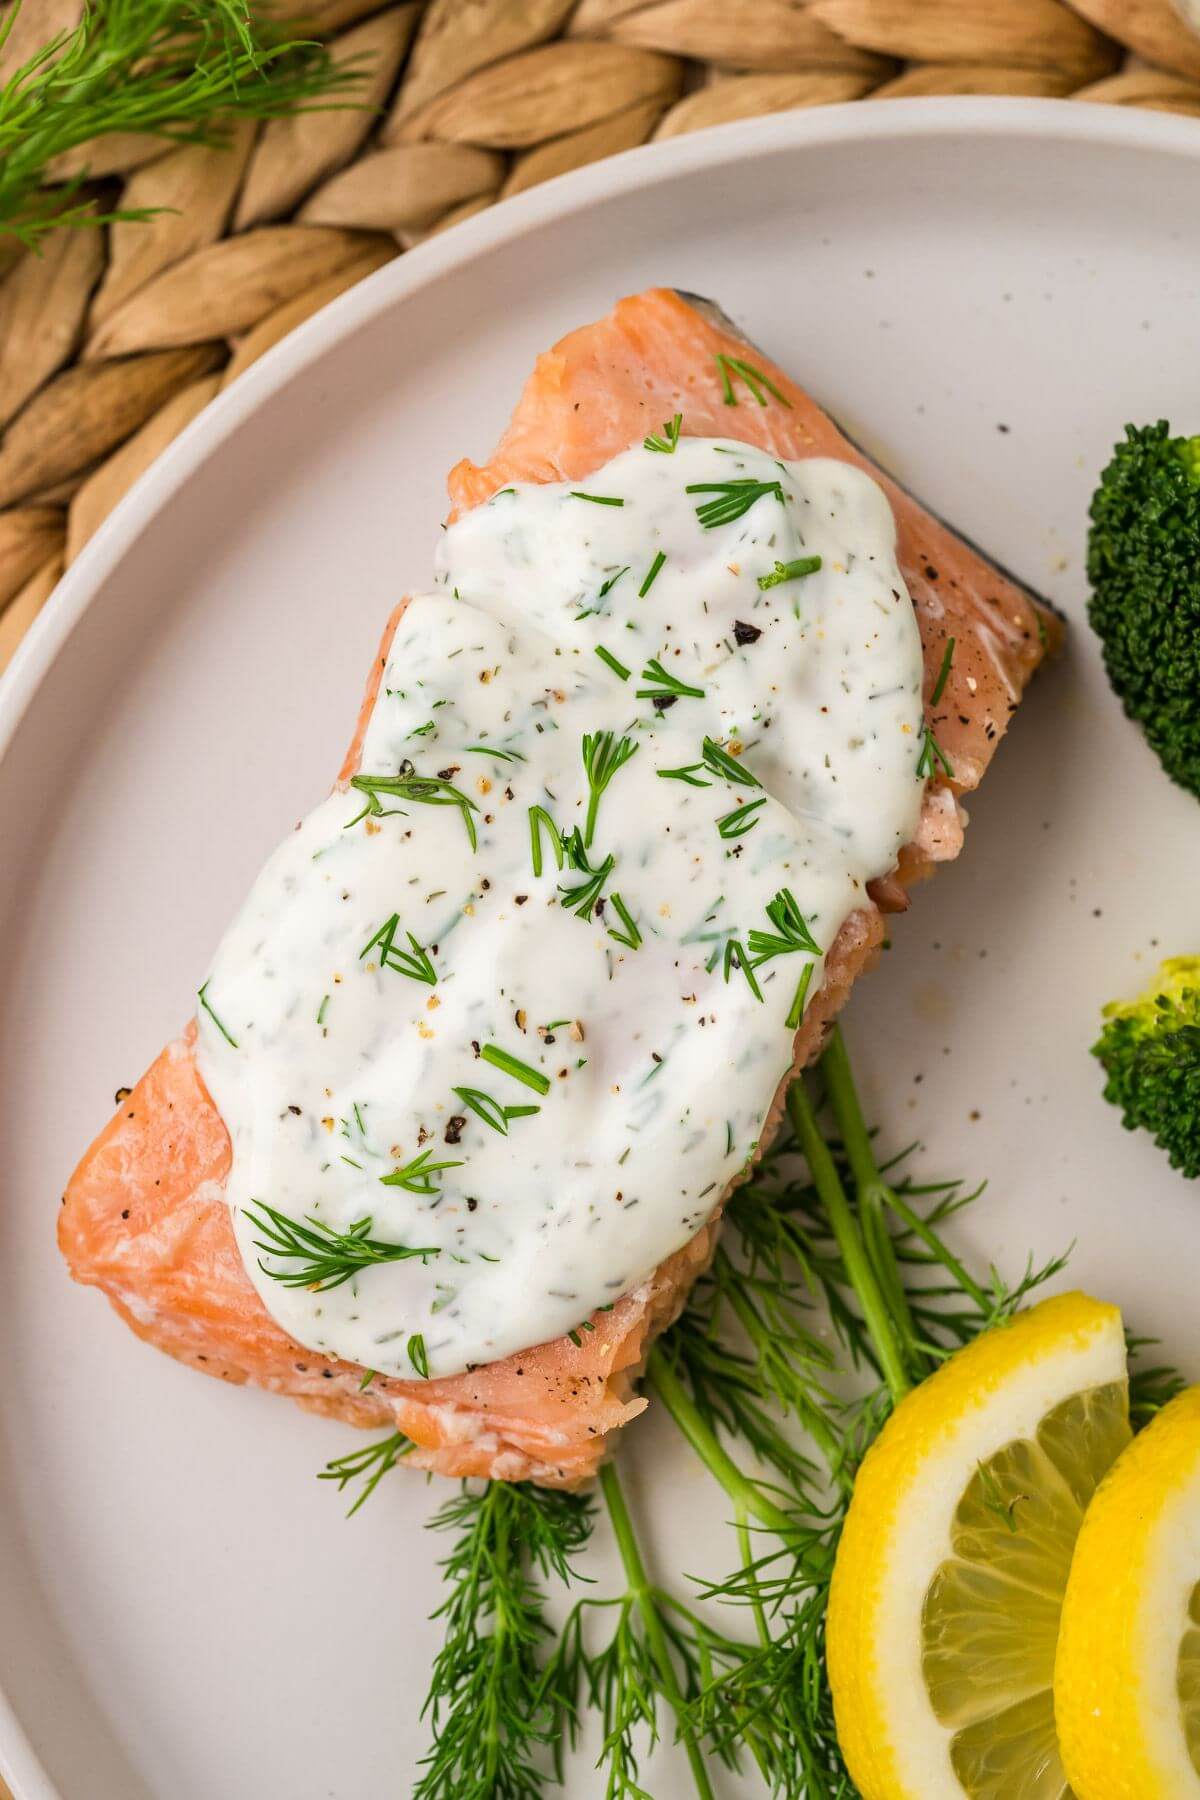 A salmon filet is coated with a white sauce with fresh dill sprinkled on top next to more dill and lemons.